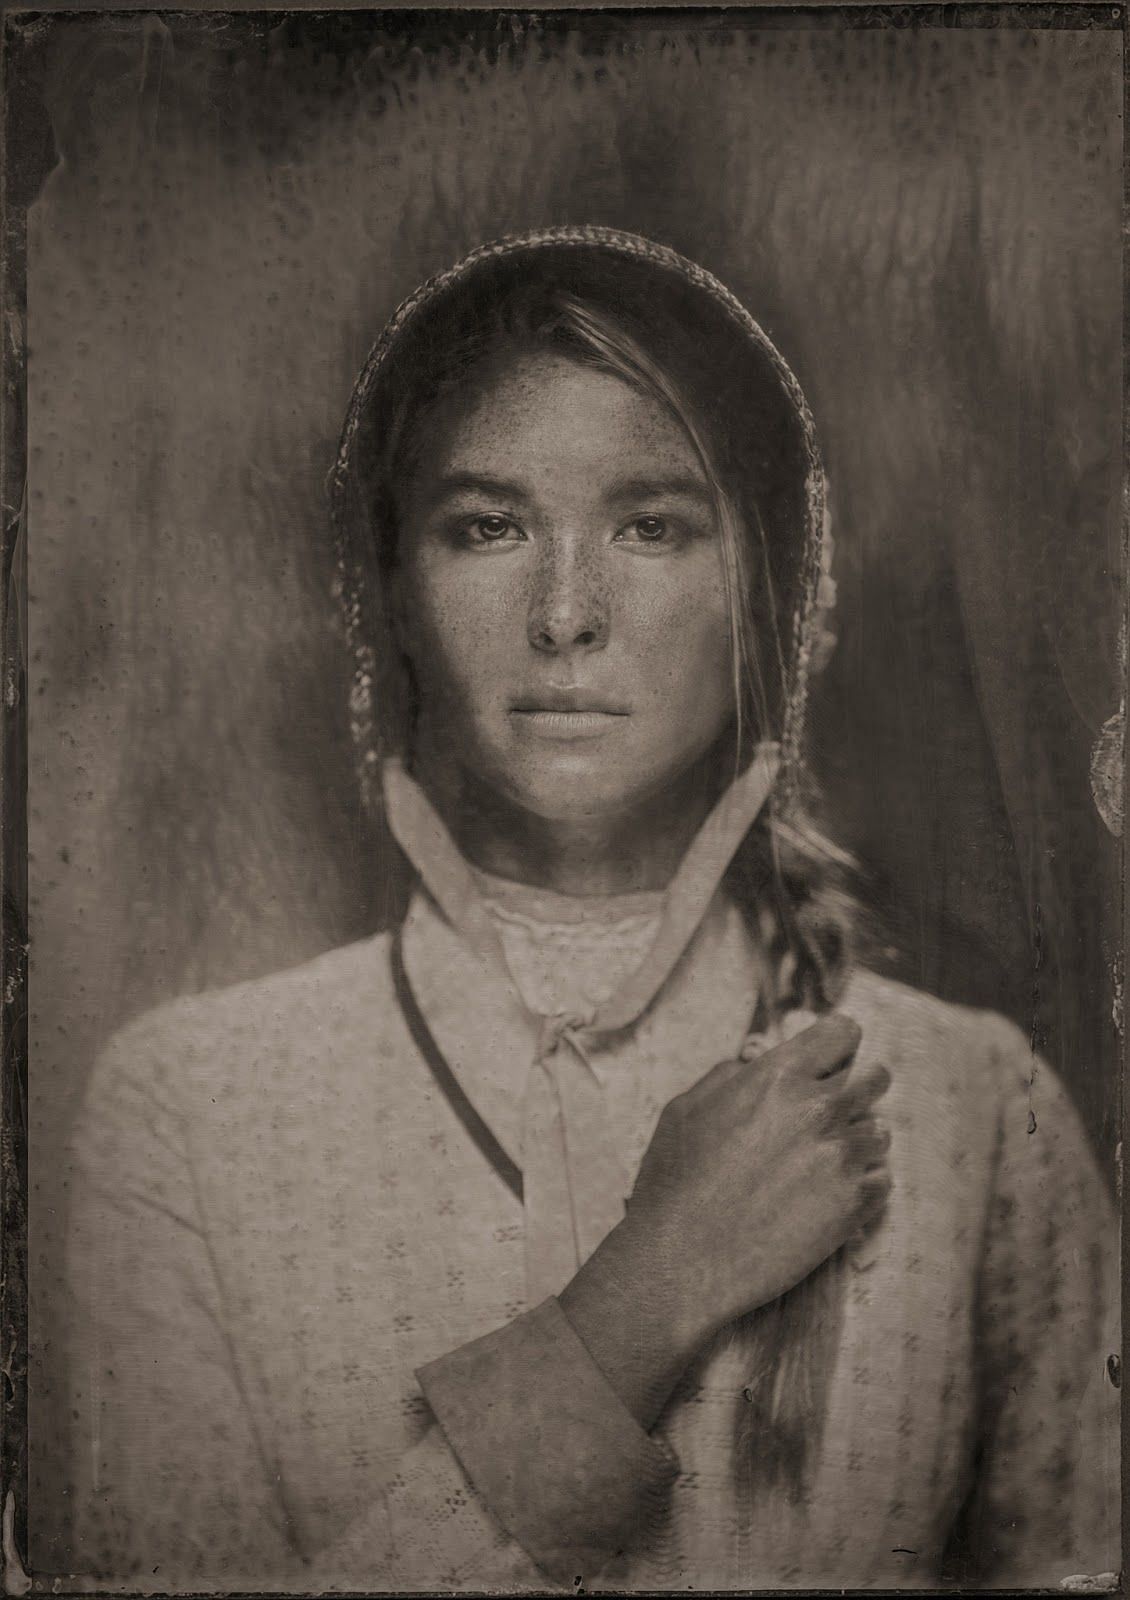 What happened to Elsa Dutton in 1883?